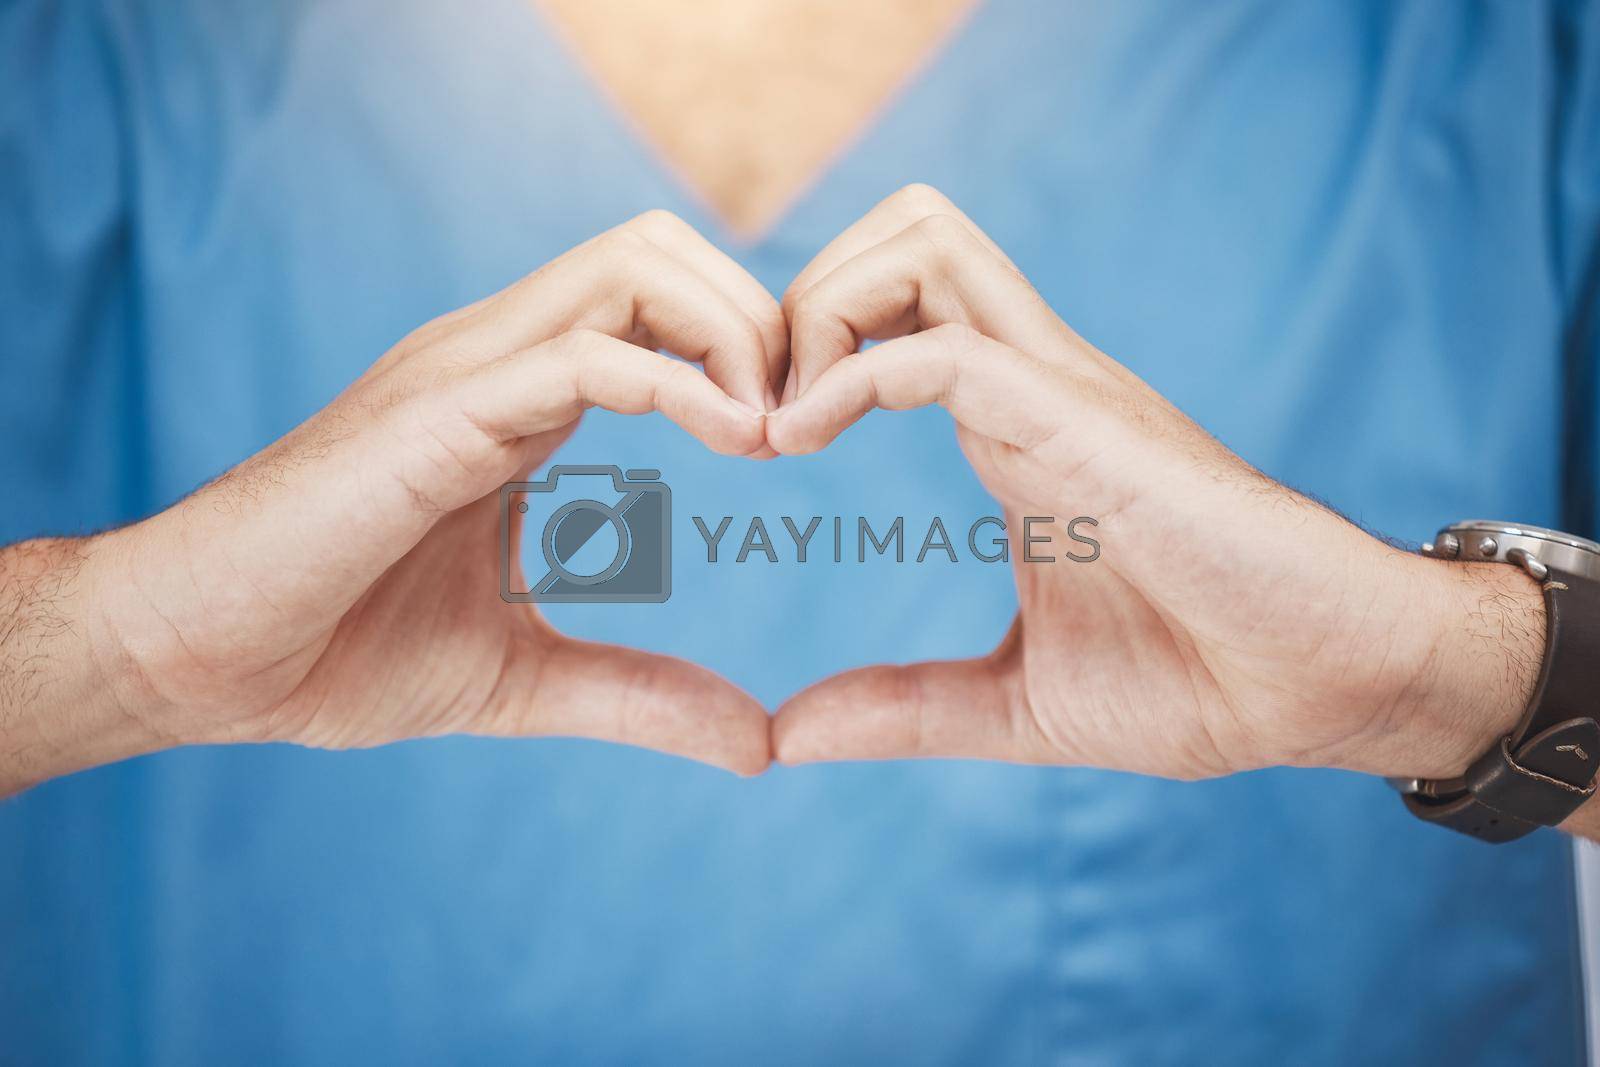 Doctor or nurse make heart sign, with hands to show care or compassion. Woman worker in healthcare show love icon with fingers, as expression of love for their job or wellness of patients.